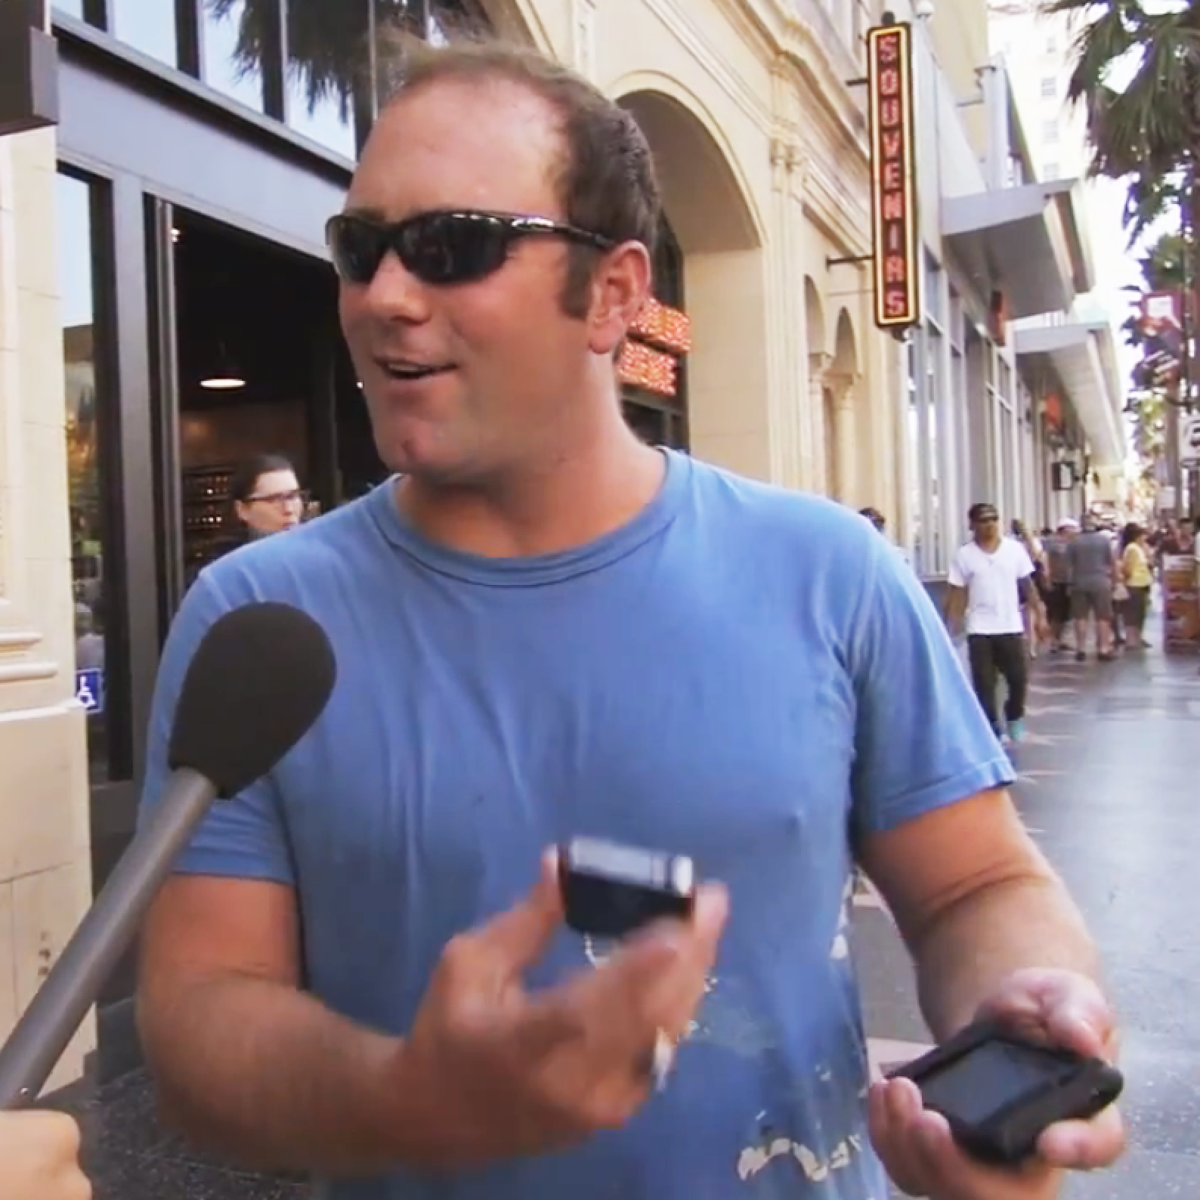 Jimmy Kimmel demonstrates that the average person doesn't know smartphones that well